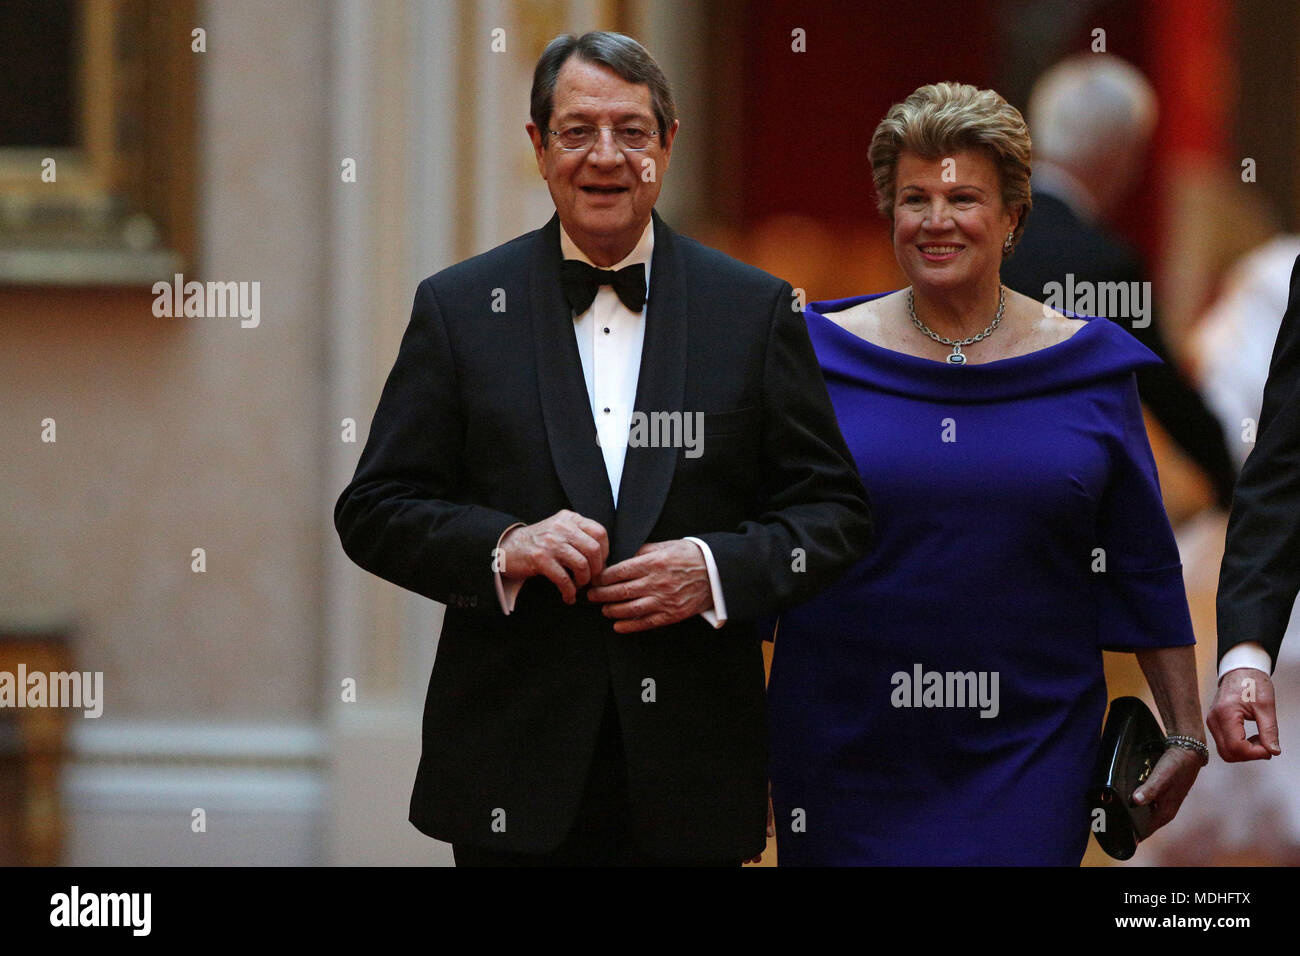 Cyprus President Nicos Anastasiades and his wife Andri arrive in the East Gallery at Buckingham Palace in London as Queen Elizabeth II hosts a dinner during the Commonwealth Heads of Government Meeting. Stock Photo